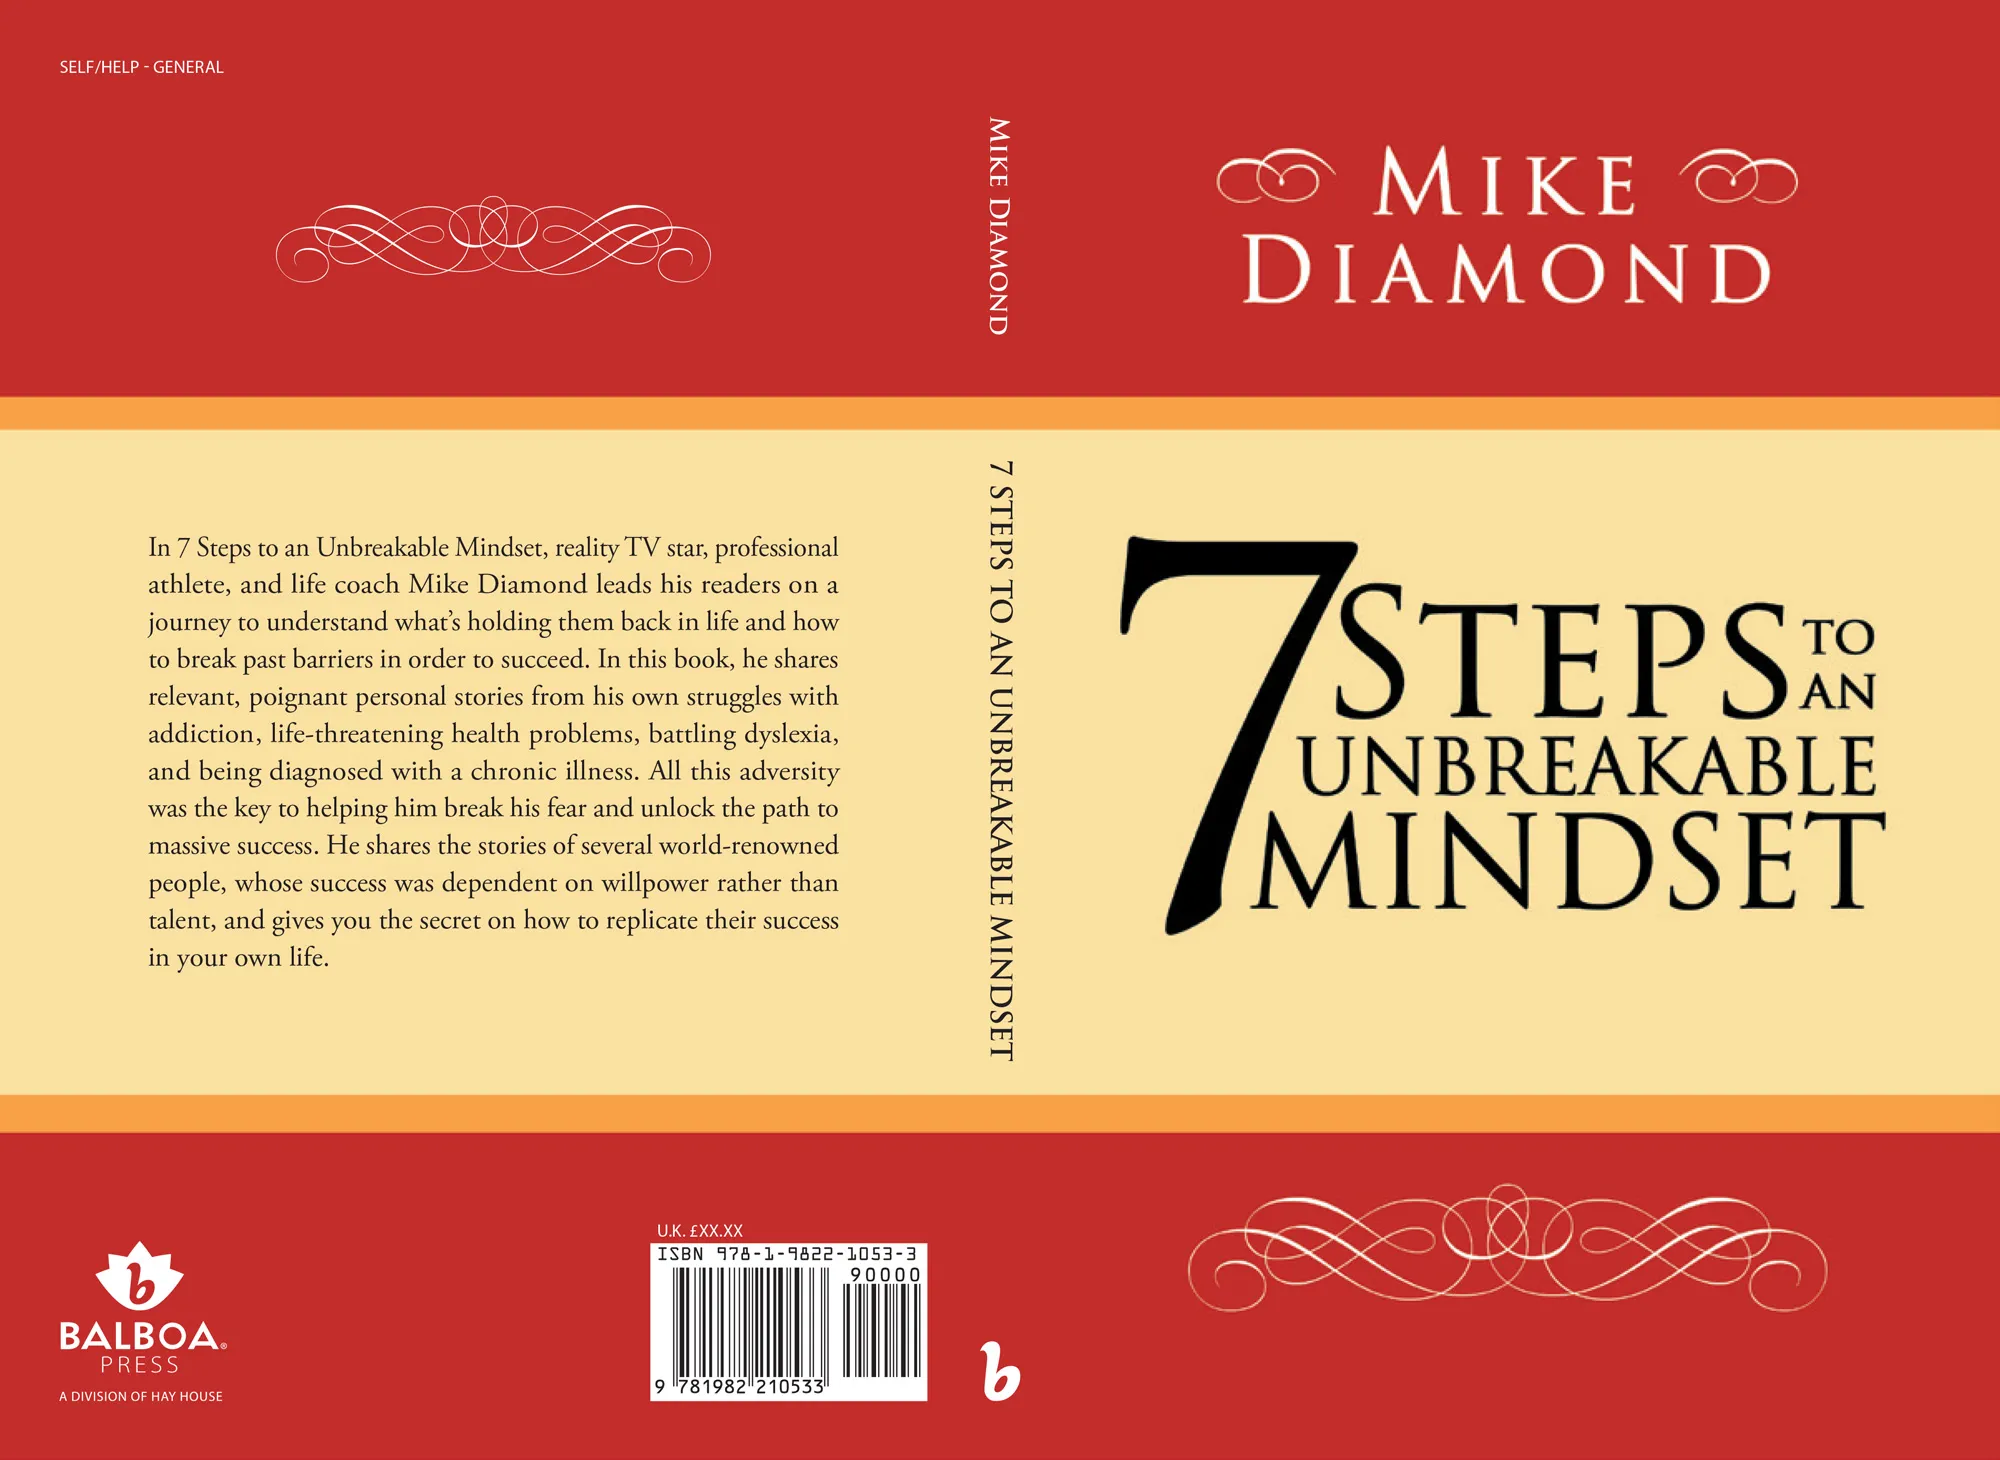 7 Steps to An Unbreakable Mindset by Mike Diamond